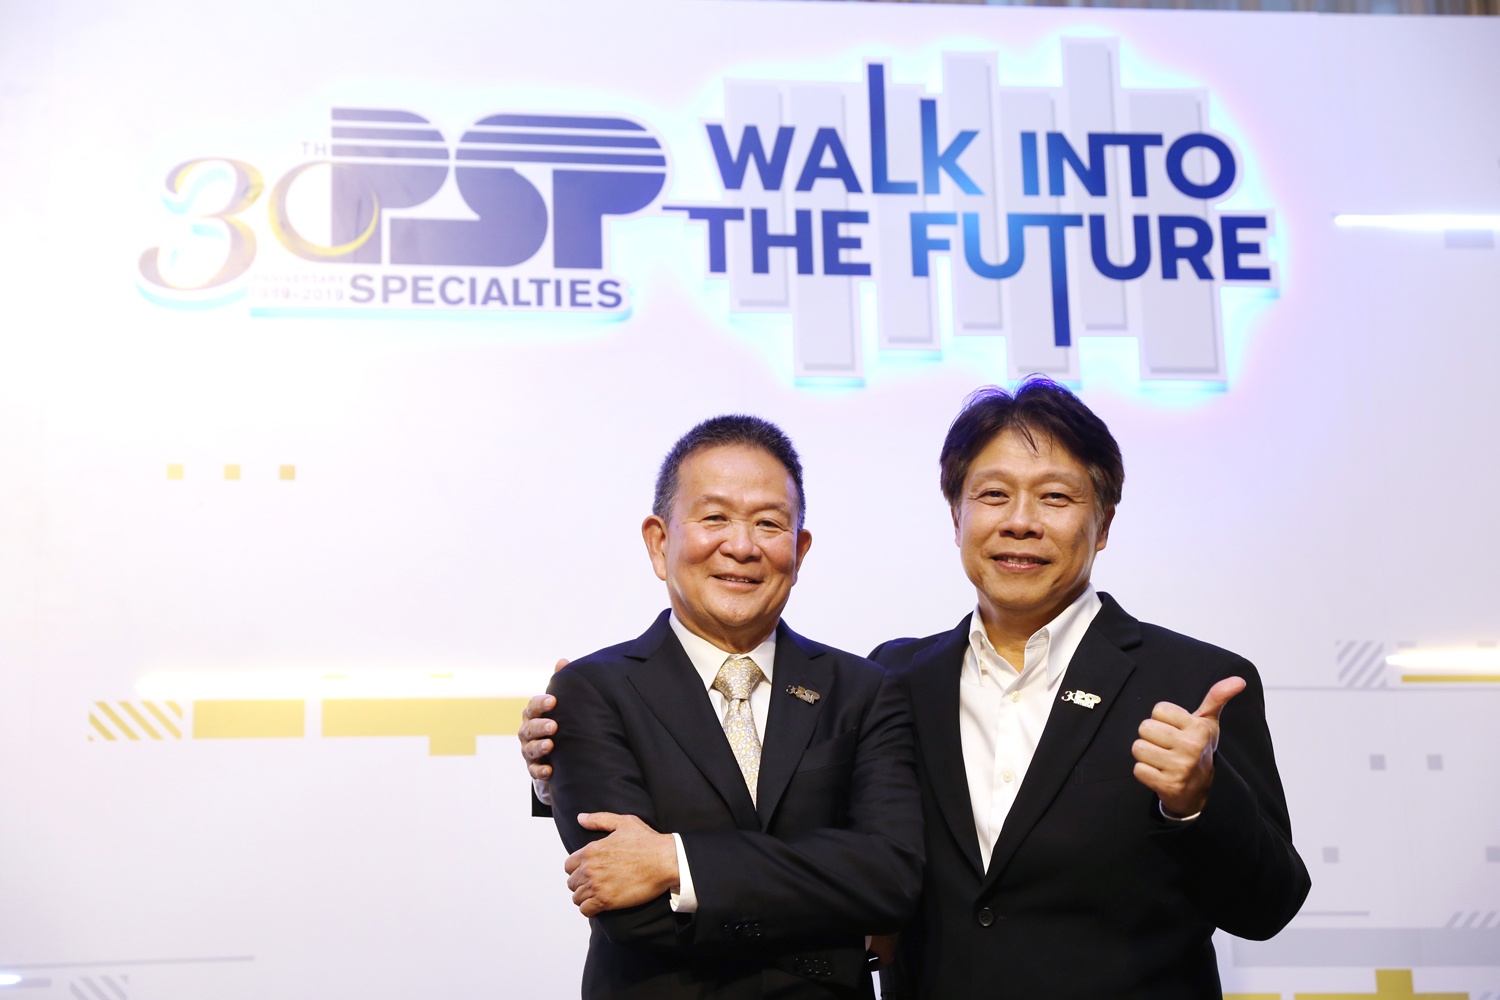 PSP Specialties celebrates 30 years of success as ASEAN’s leading manufacturer of lubricant products